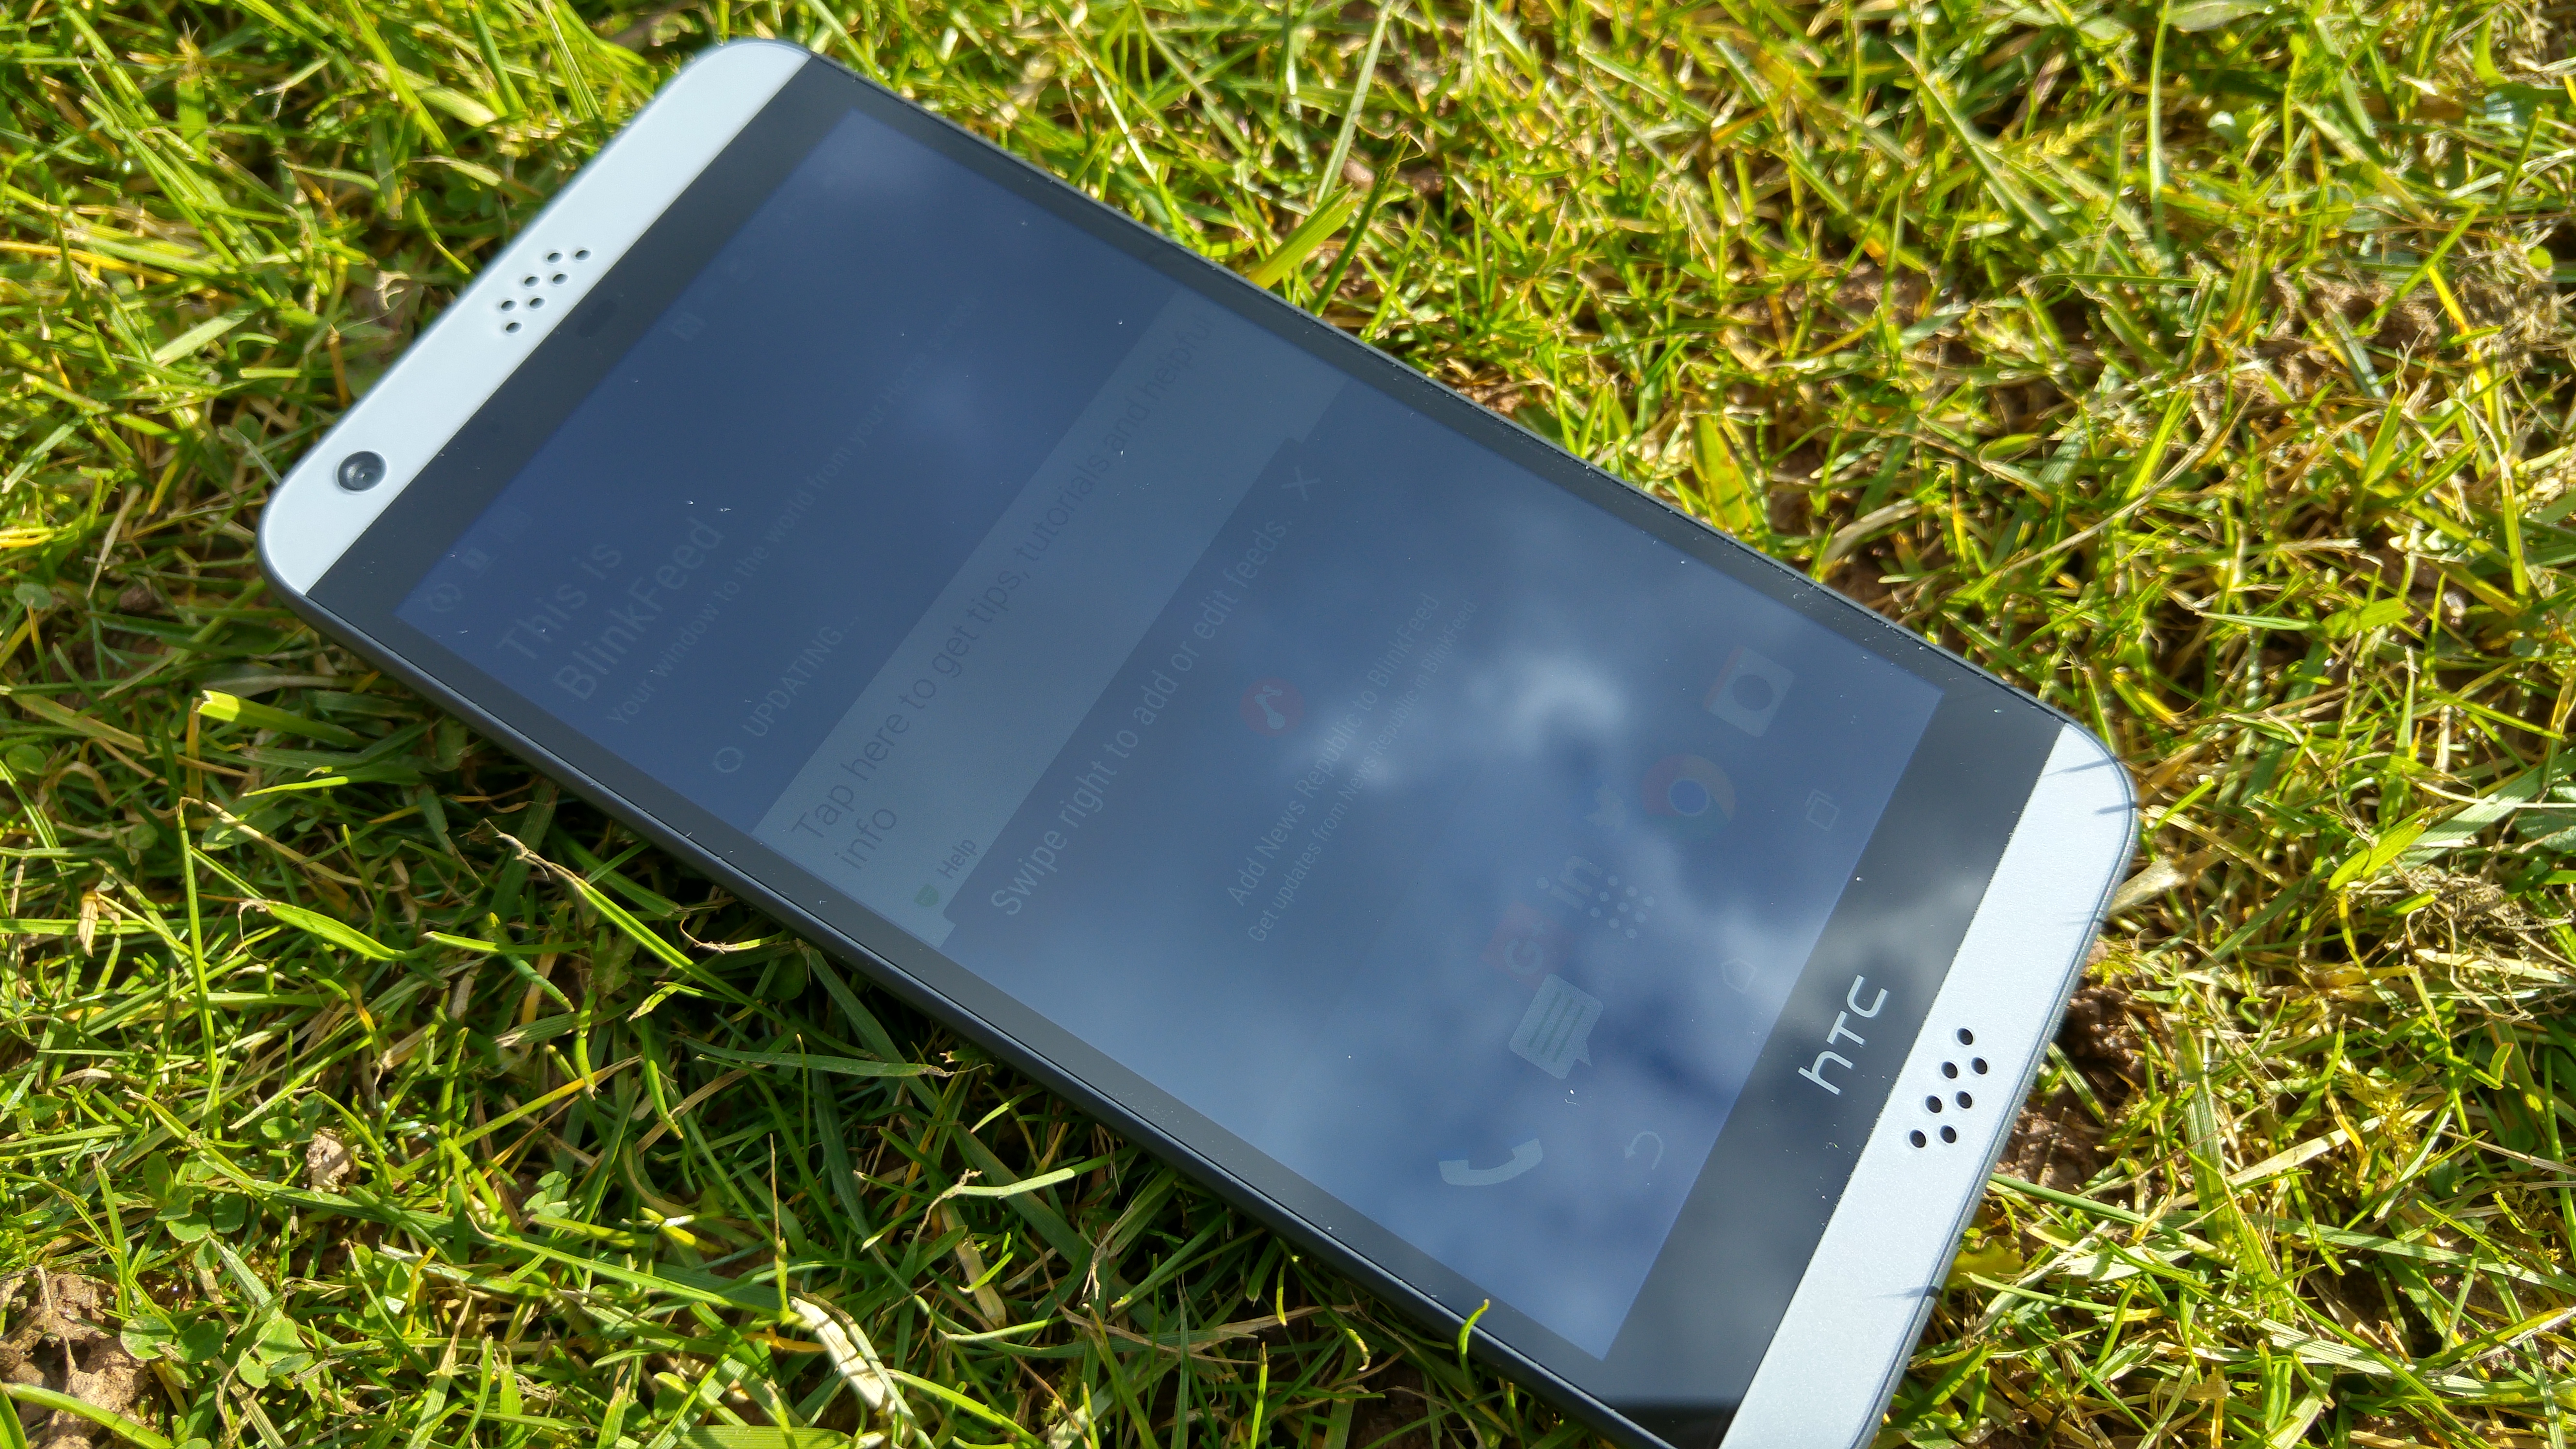 HTC Desire C review